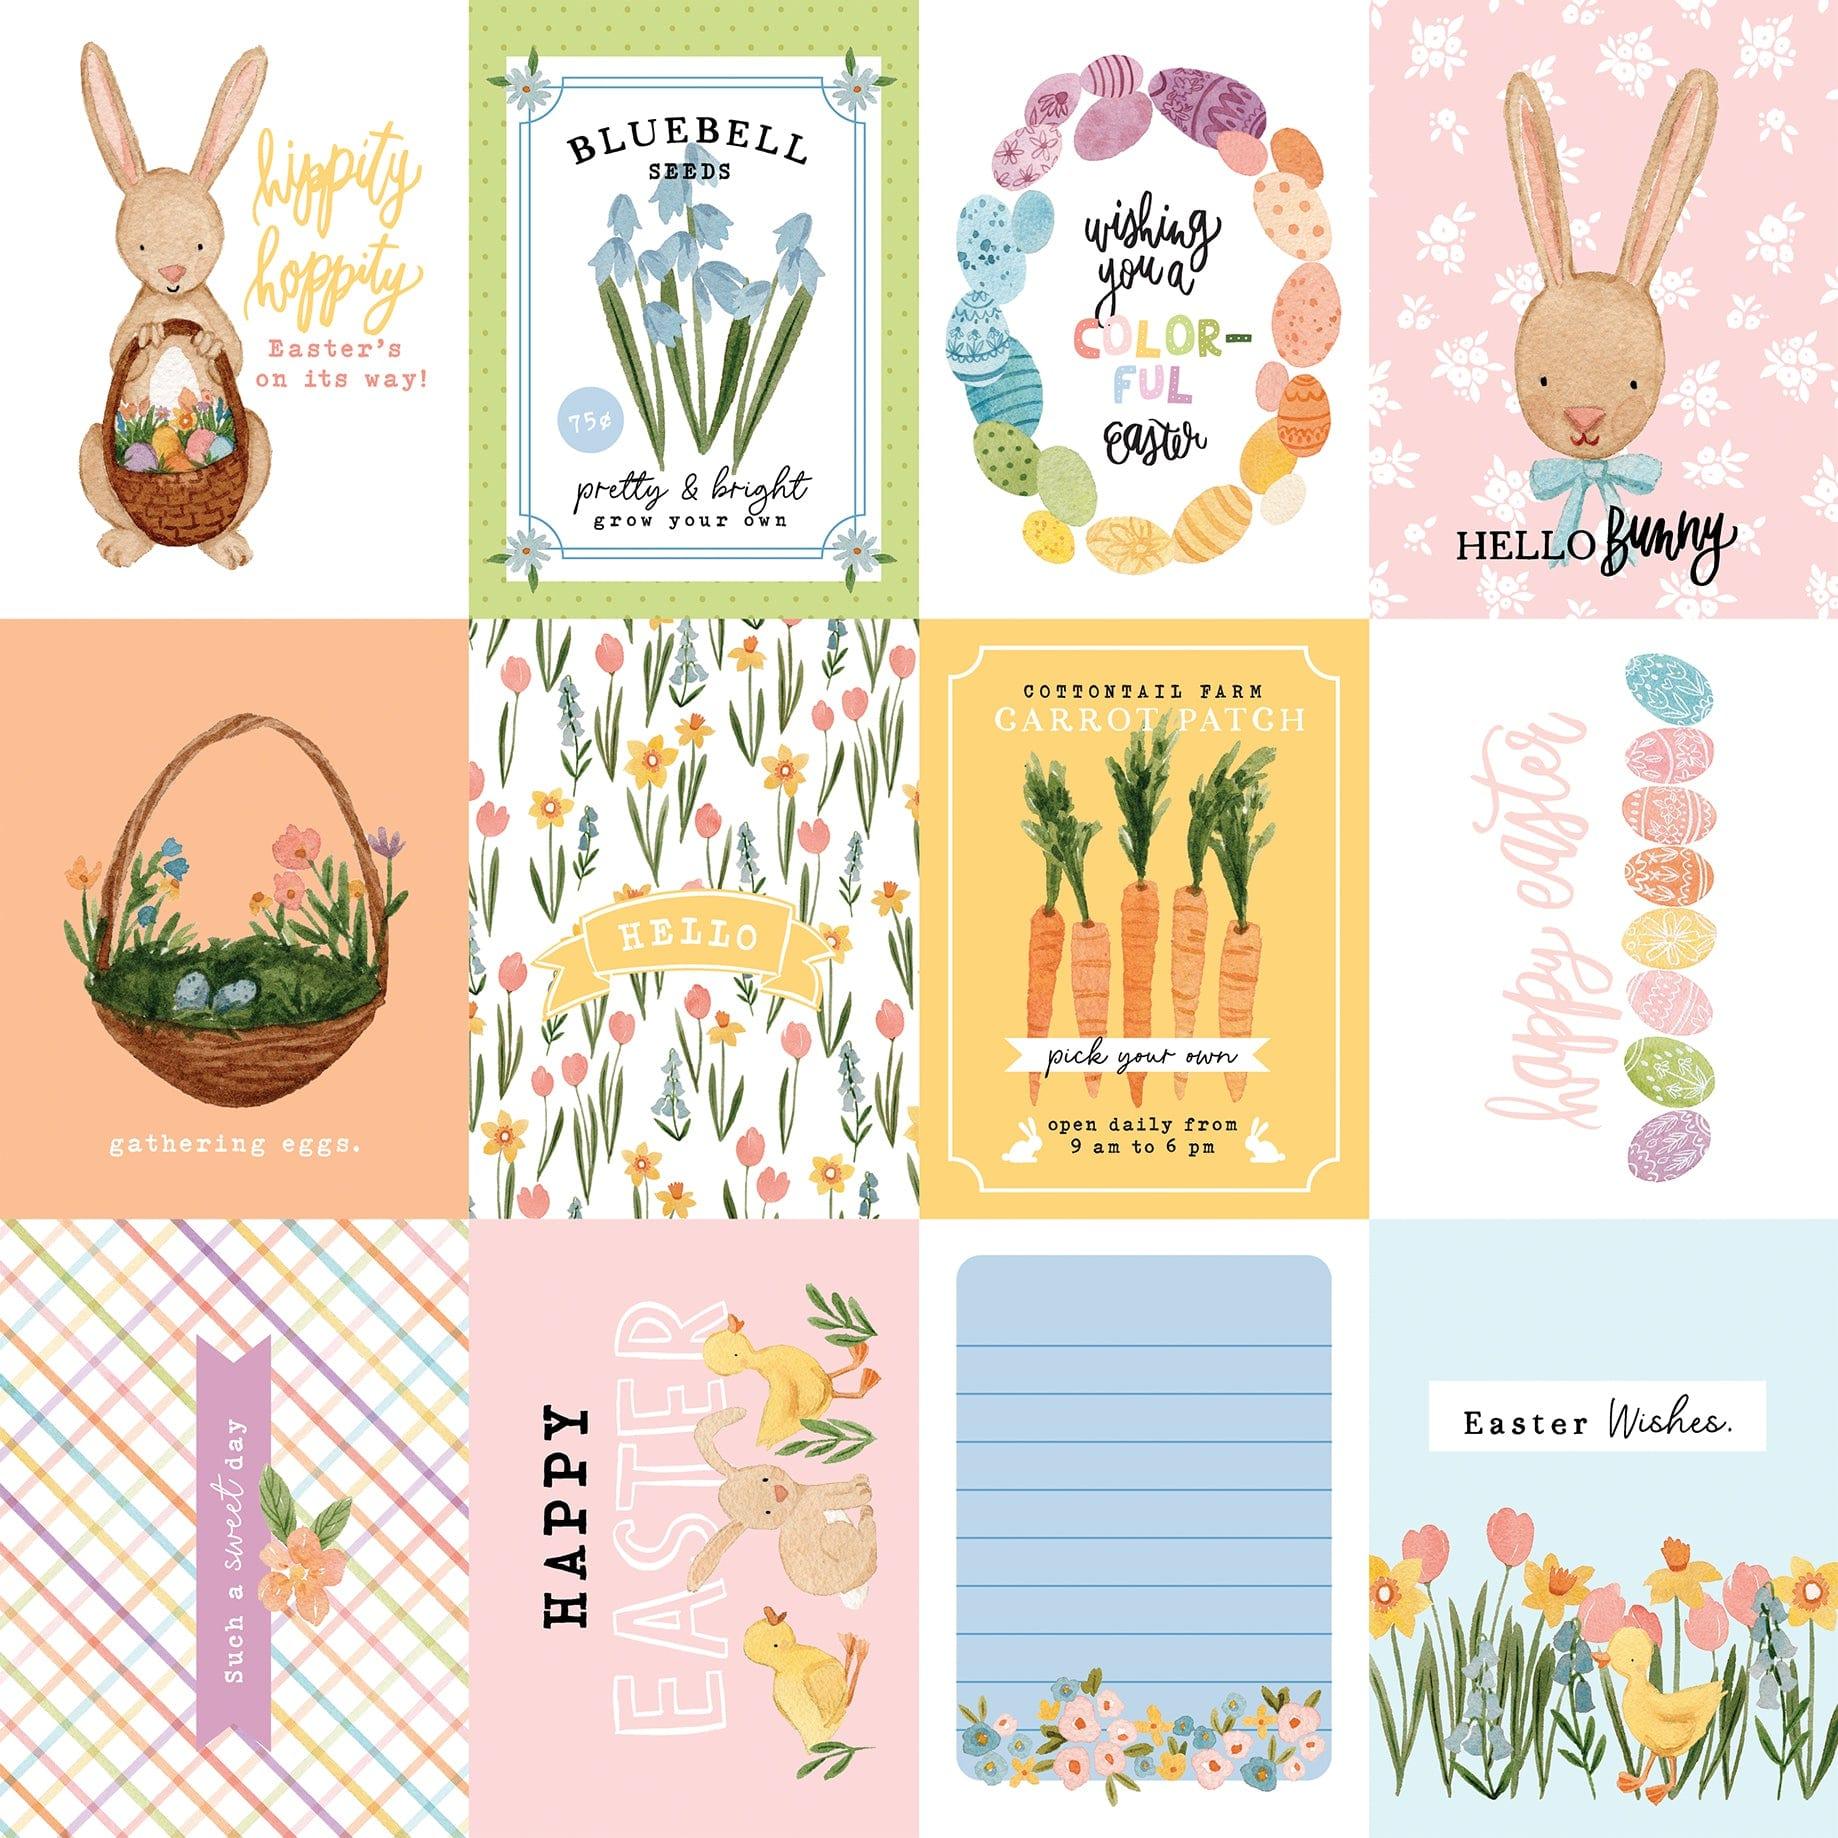 My Favorite Easter Collection 3 x 4 Journaling Cards 12 x 12 Double-Sided Scrapbook Paper by Echo Park Paper - Scrapbook Supply Companies